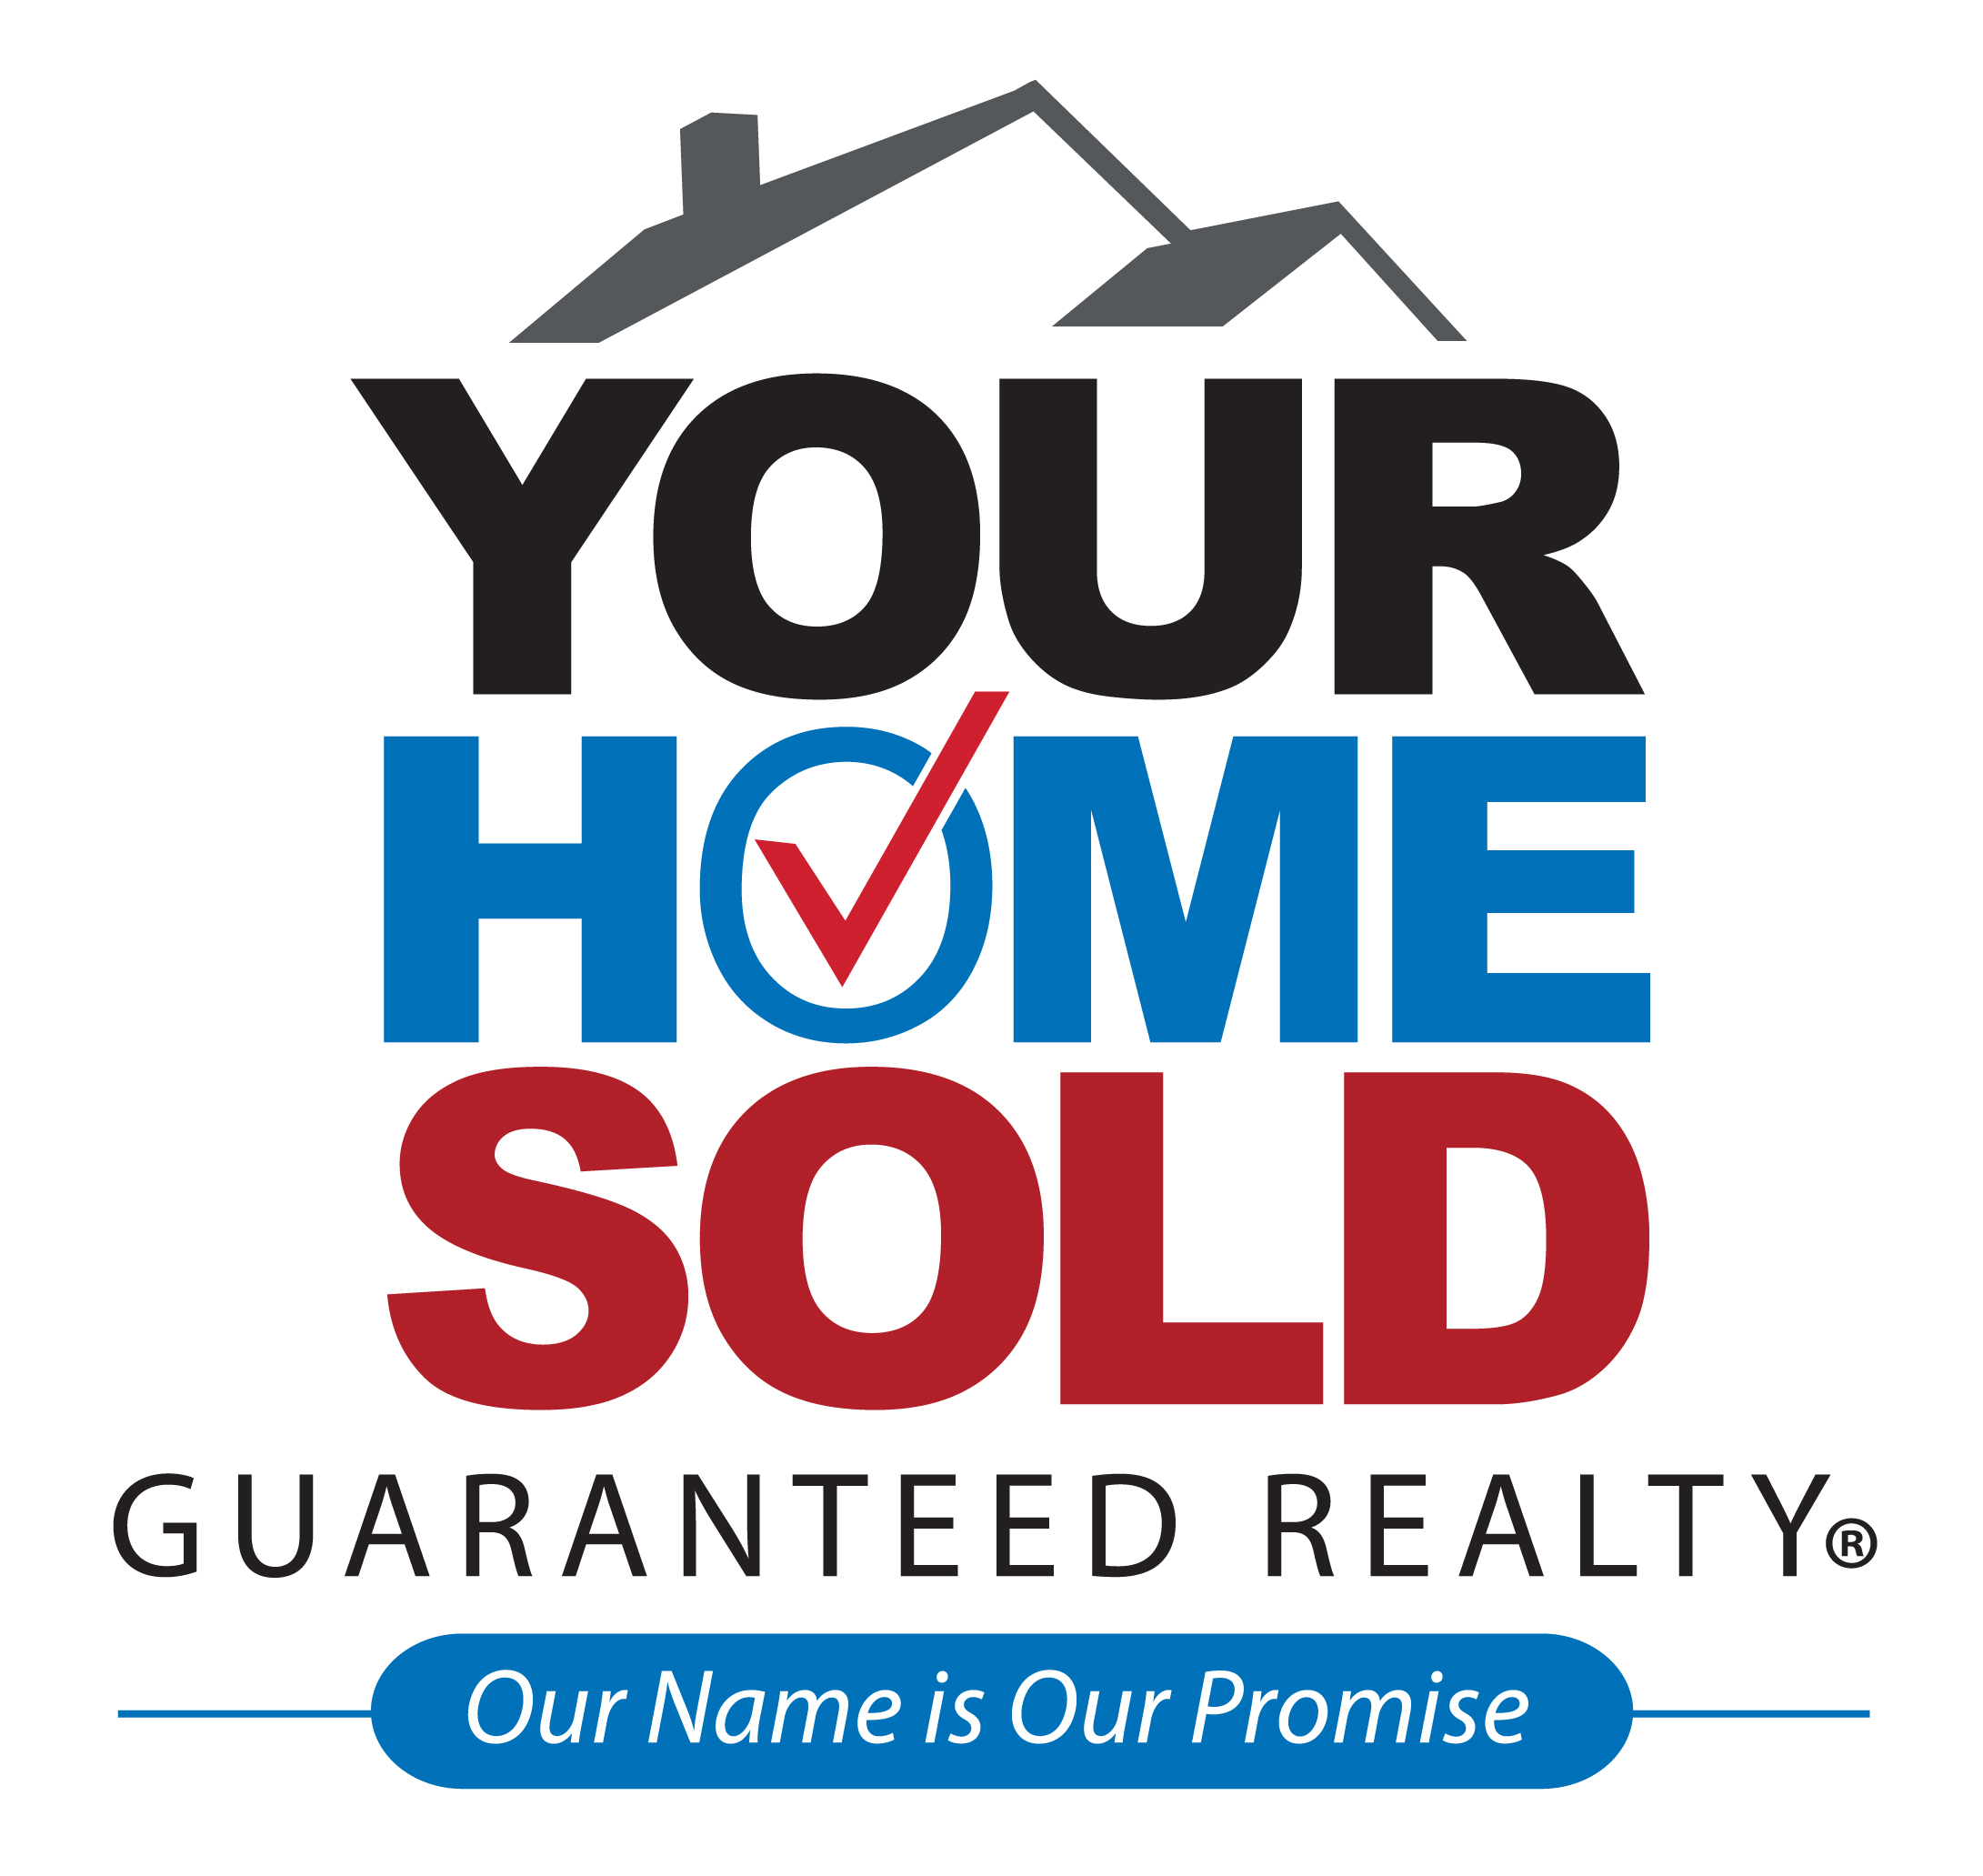 Your Home Sold Guaranteed Realty (Tier 3)